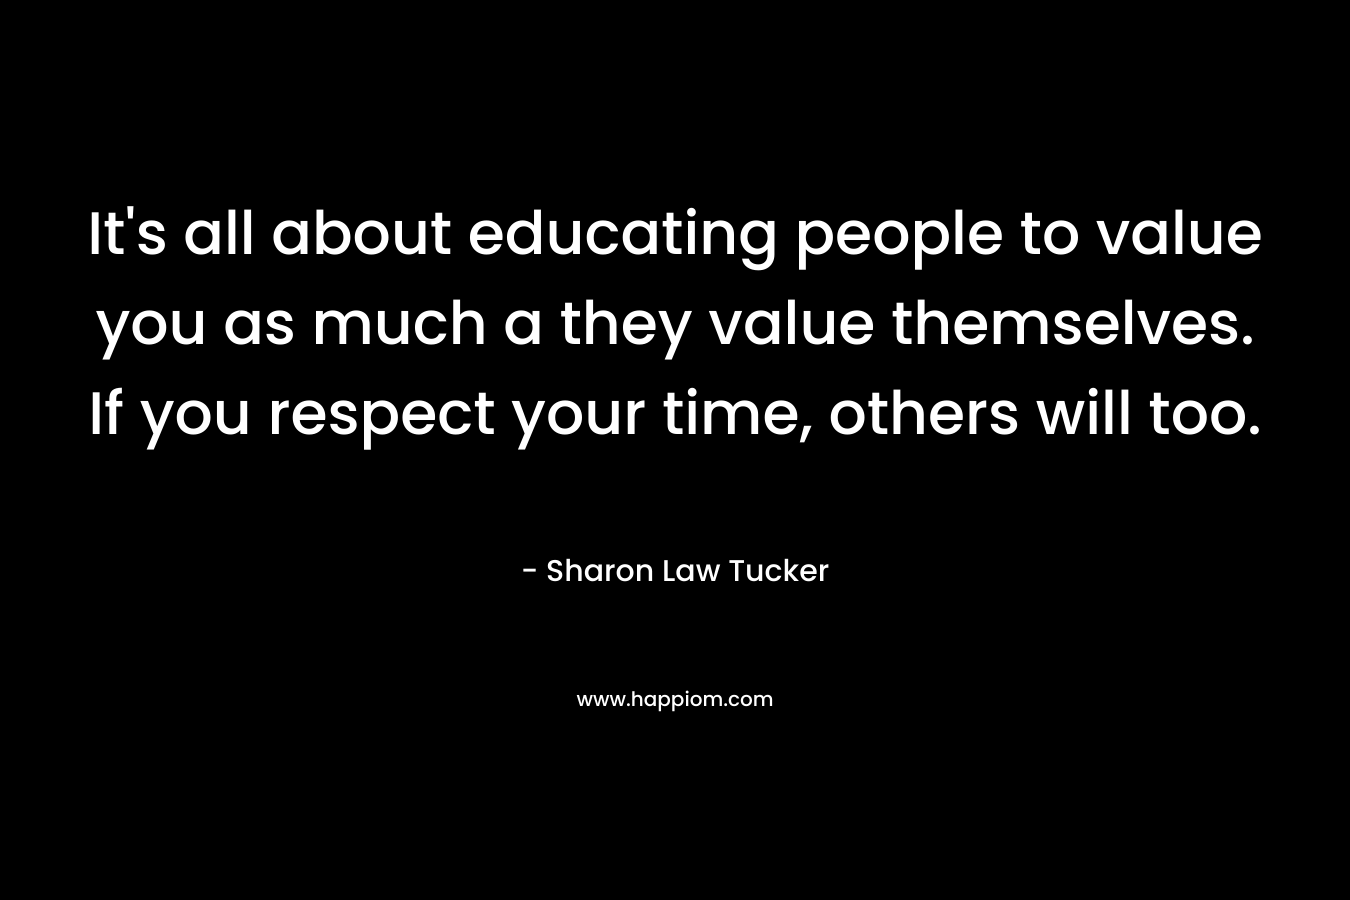 It’s all about educating people to value you as much a they value themselves. If you respect your time, others will too. – Sharon Law Tucker